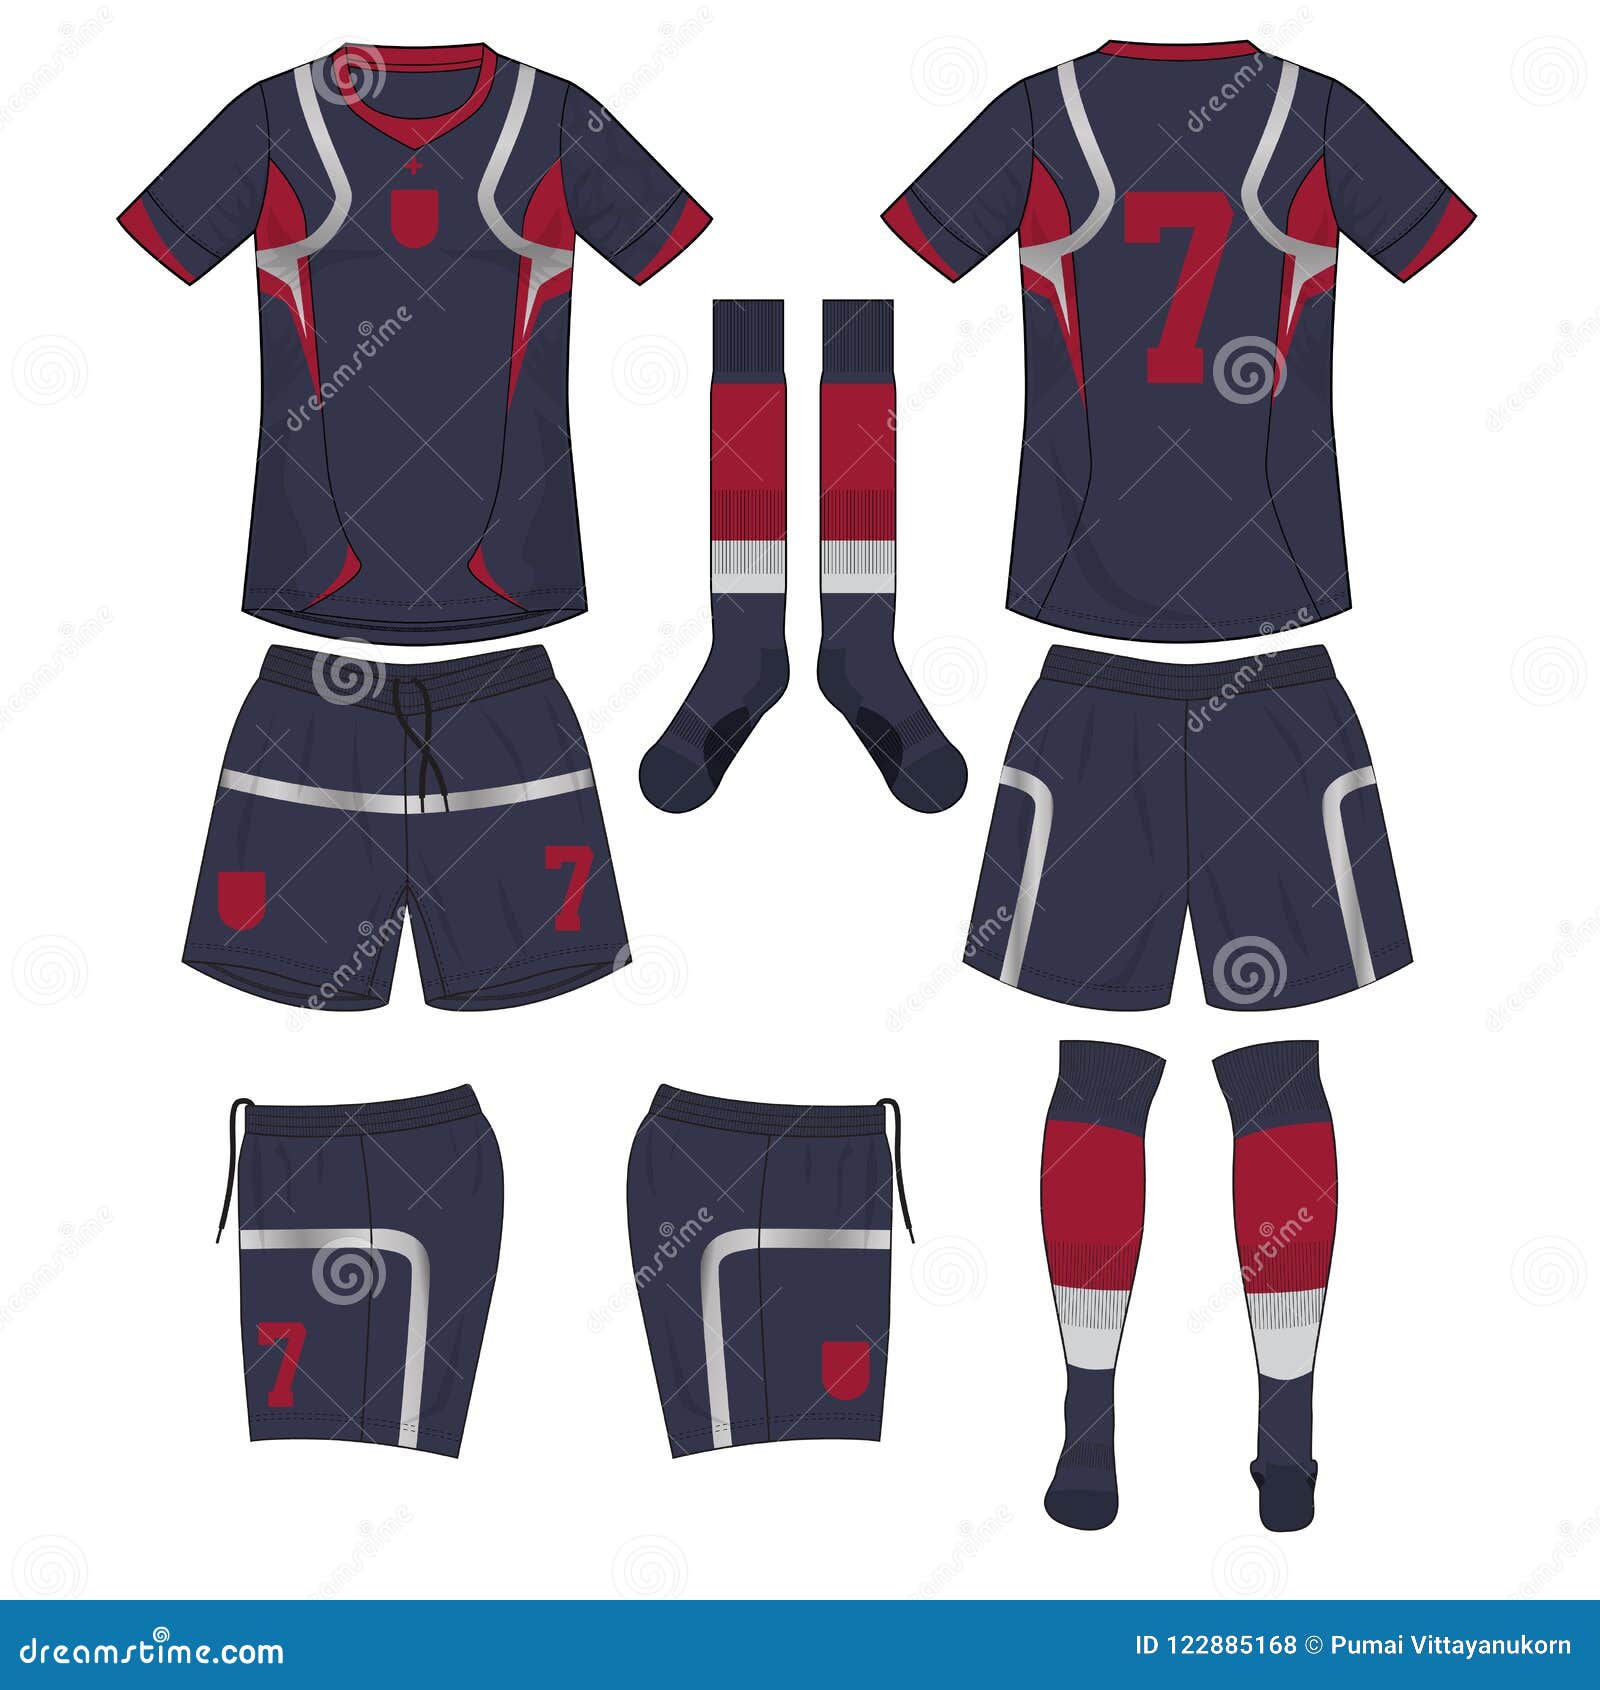 navy blue and red jersey